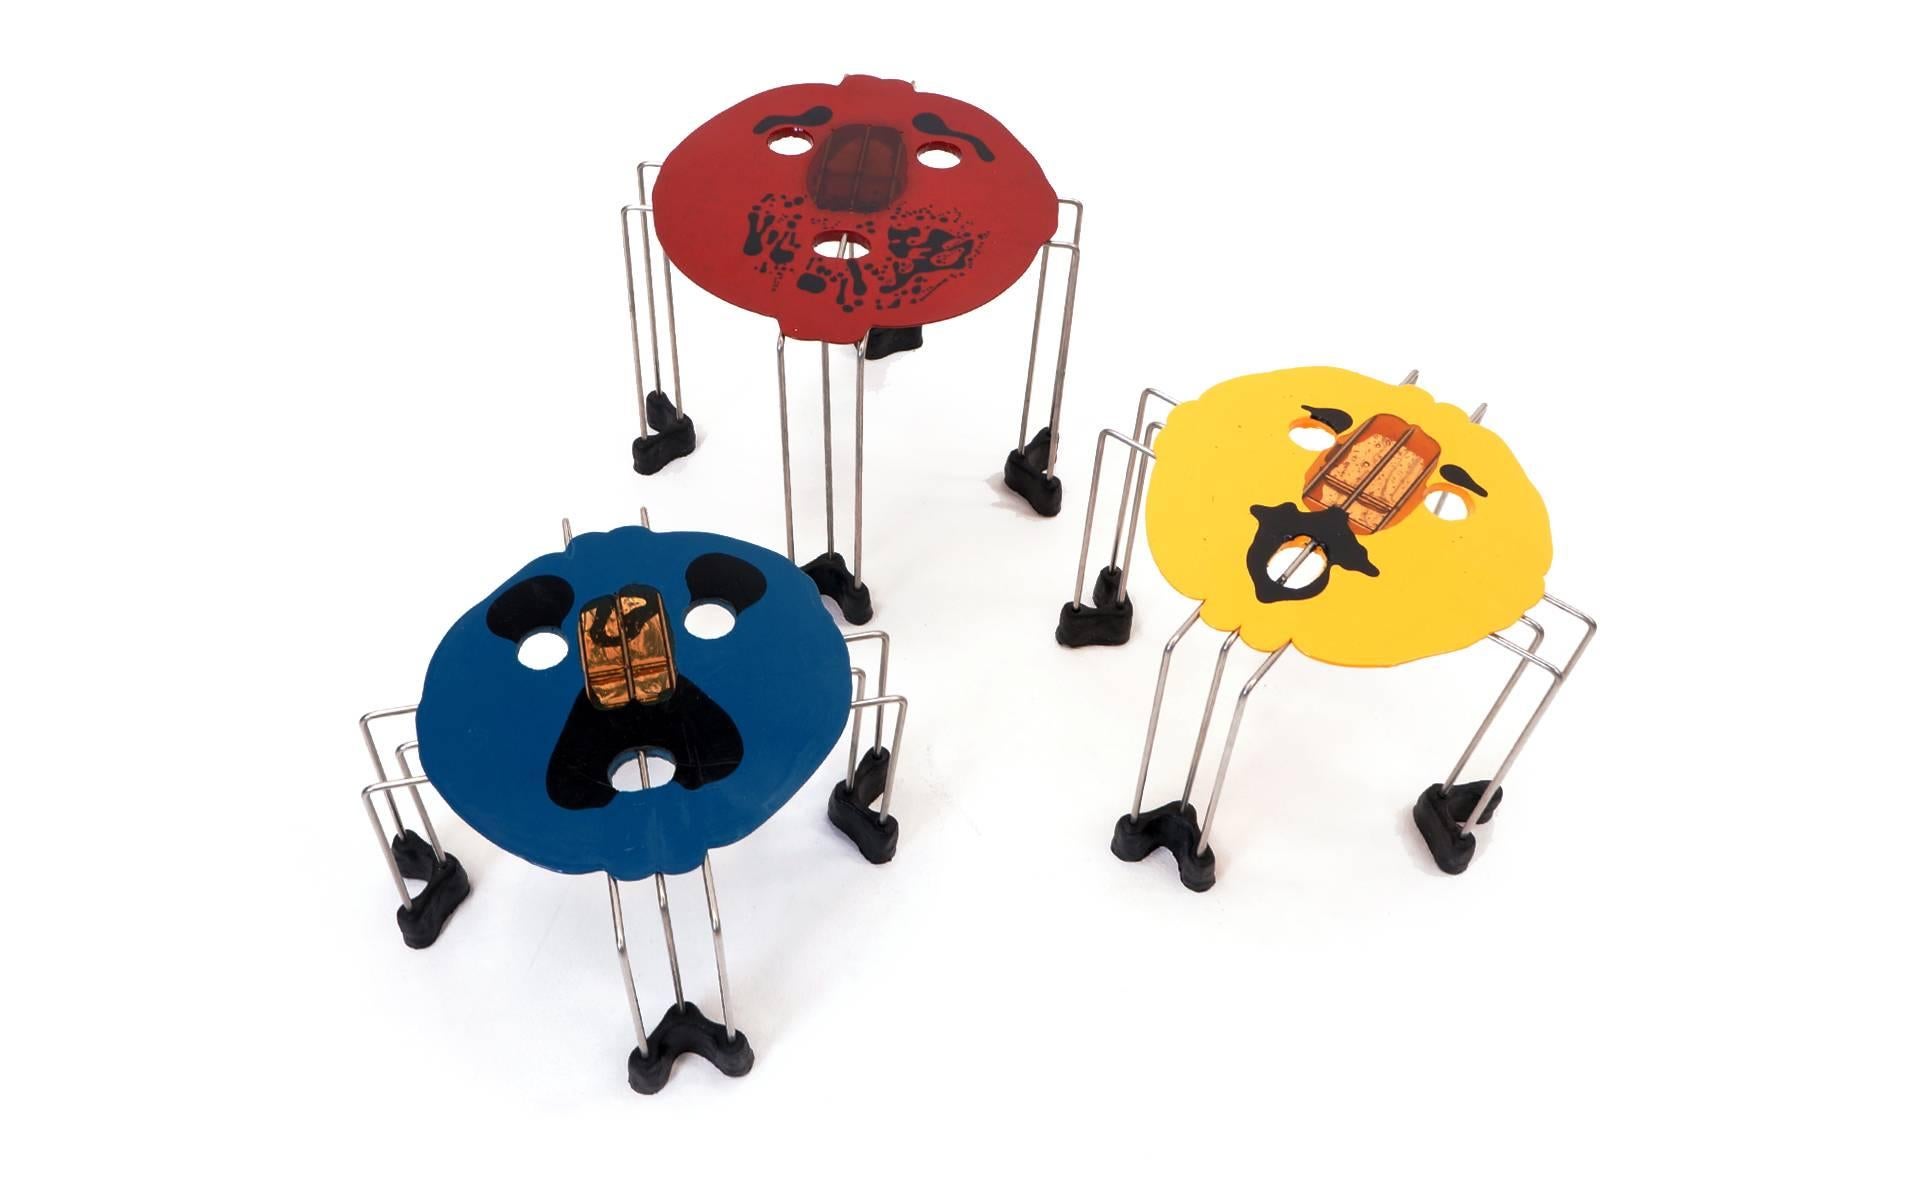 Red, blue and yellow with multiple colors, set of three Gaetano Pesce nesting table. Like new condition. Signed.
Height measurements are 14.25 in., 11.25 in., and 8.75 in.